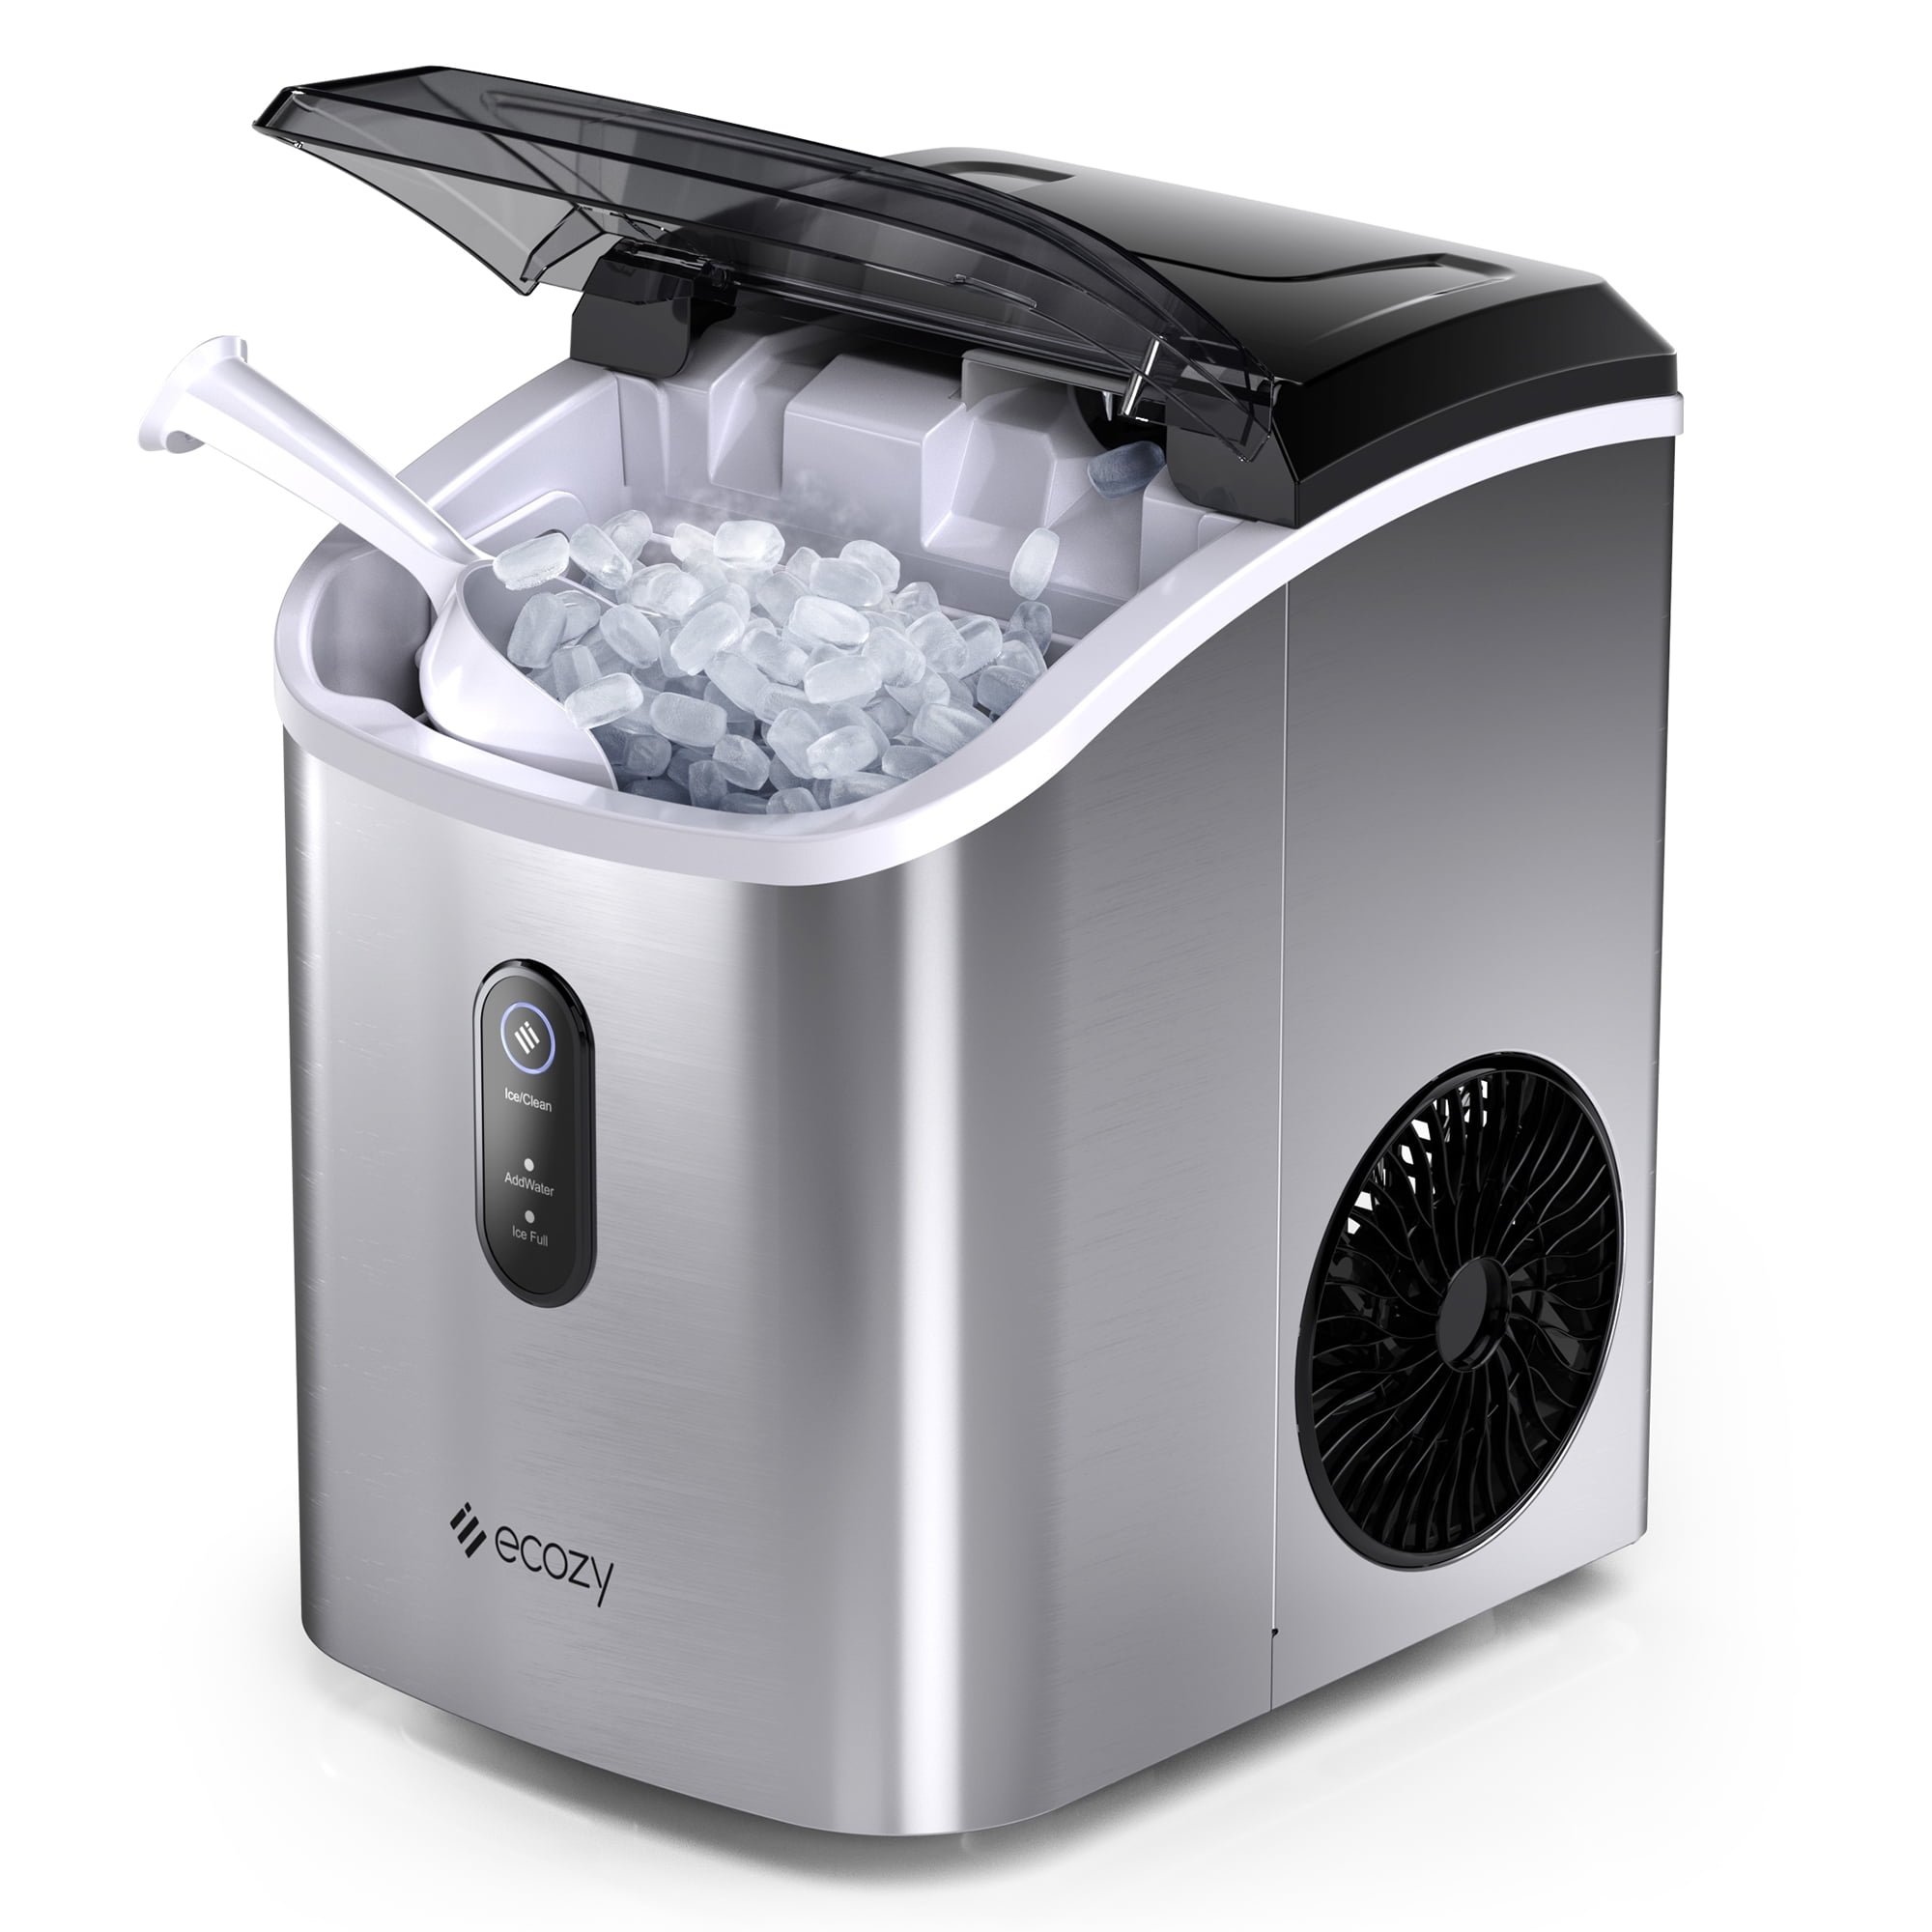 ecozy Portable Countertop Ice Maker - 9 Ice Cubes in 6 Minutes, 26 lbs ·  DISCOUNT BROS